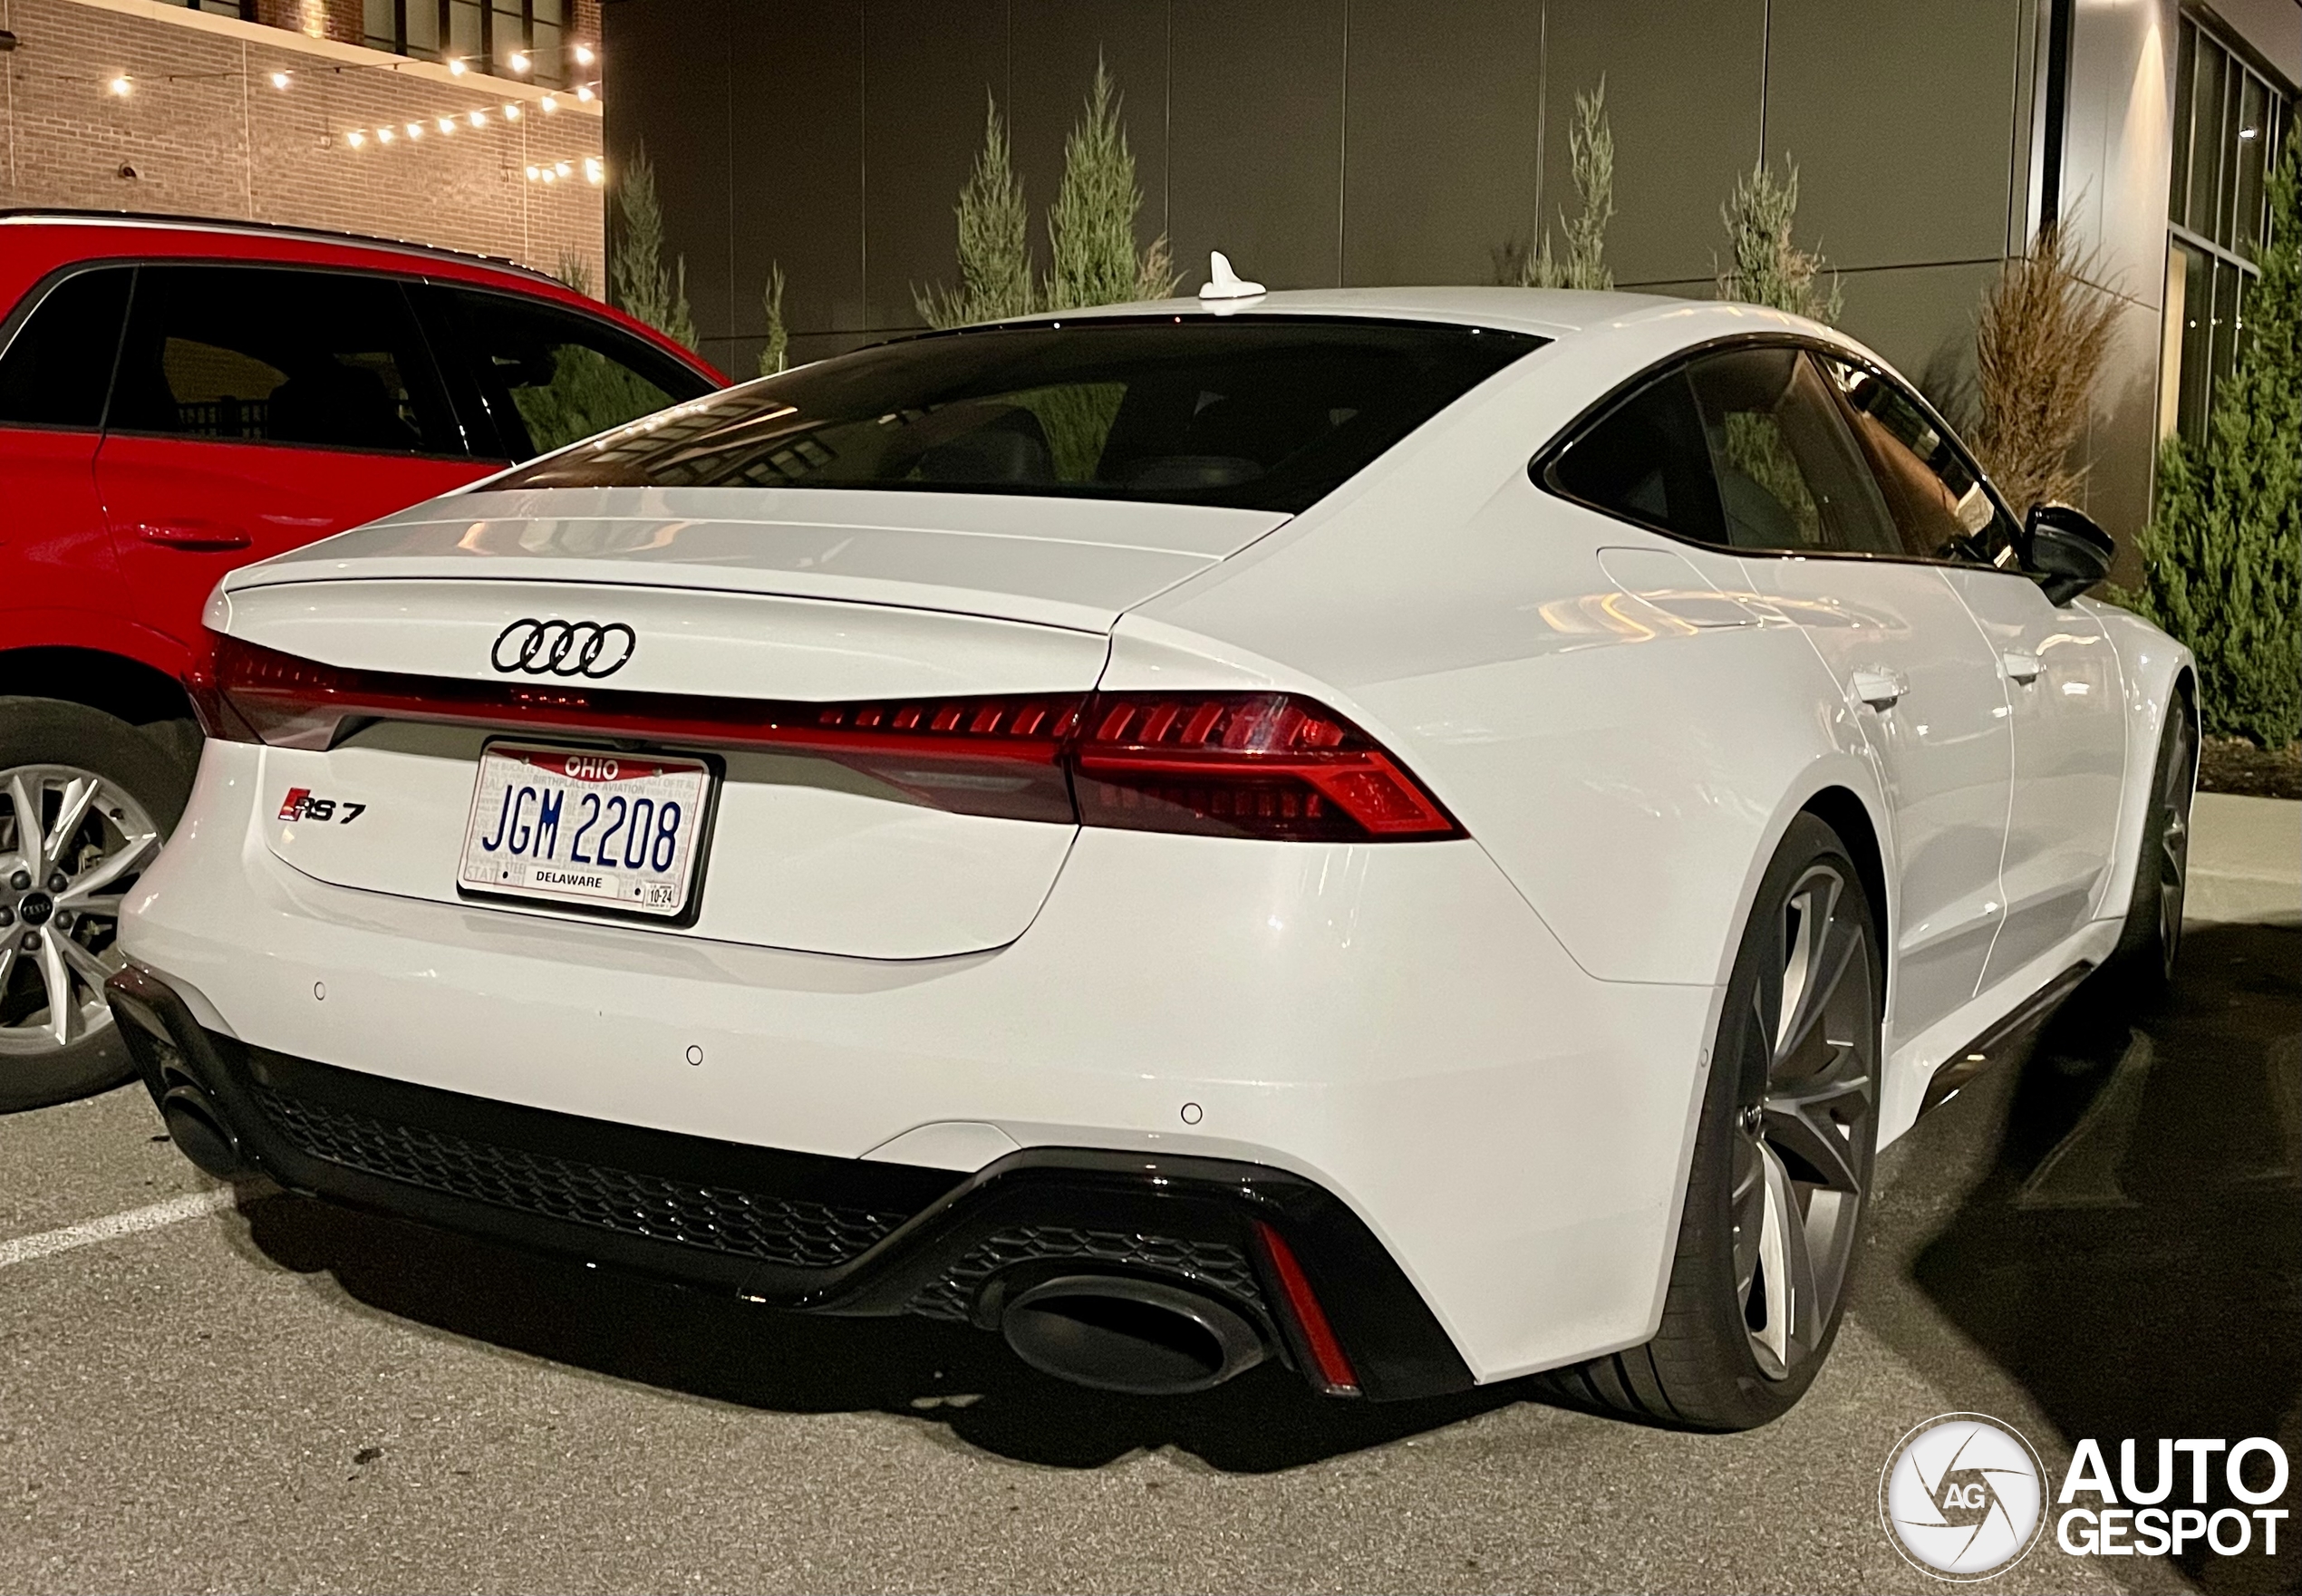 New Audi RS7 spotted: price, specs, release date